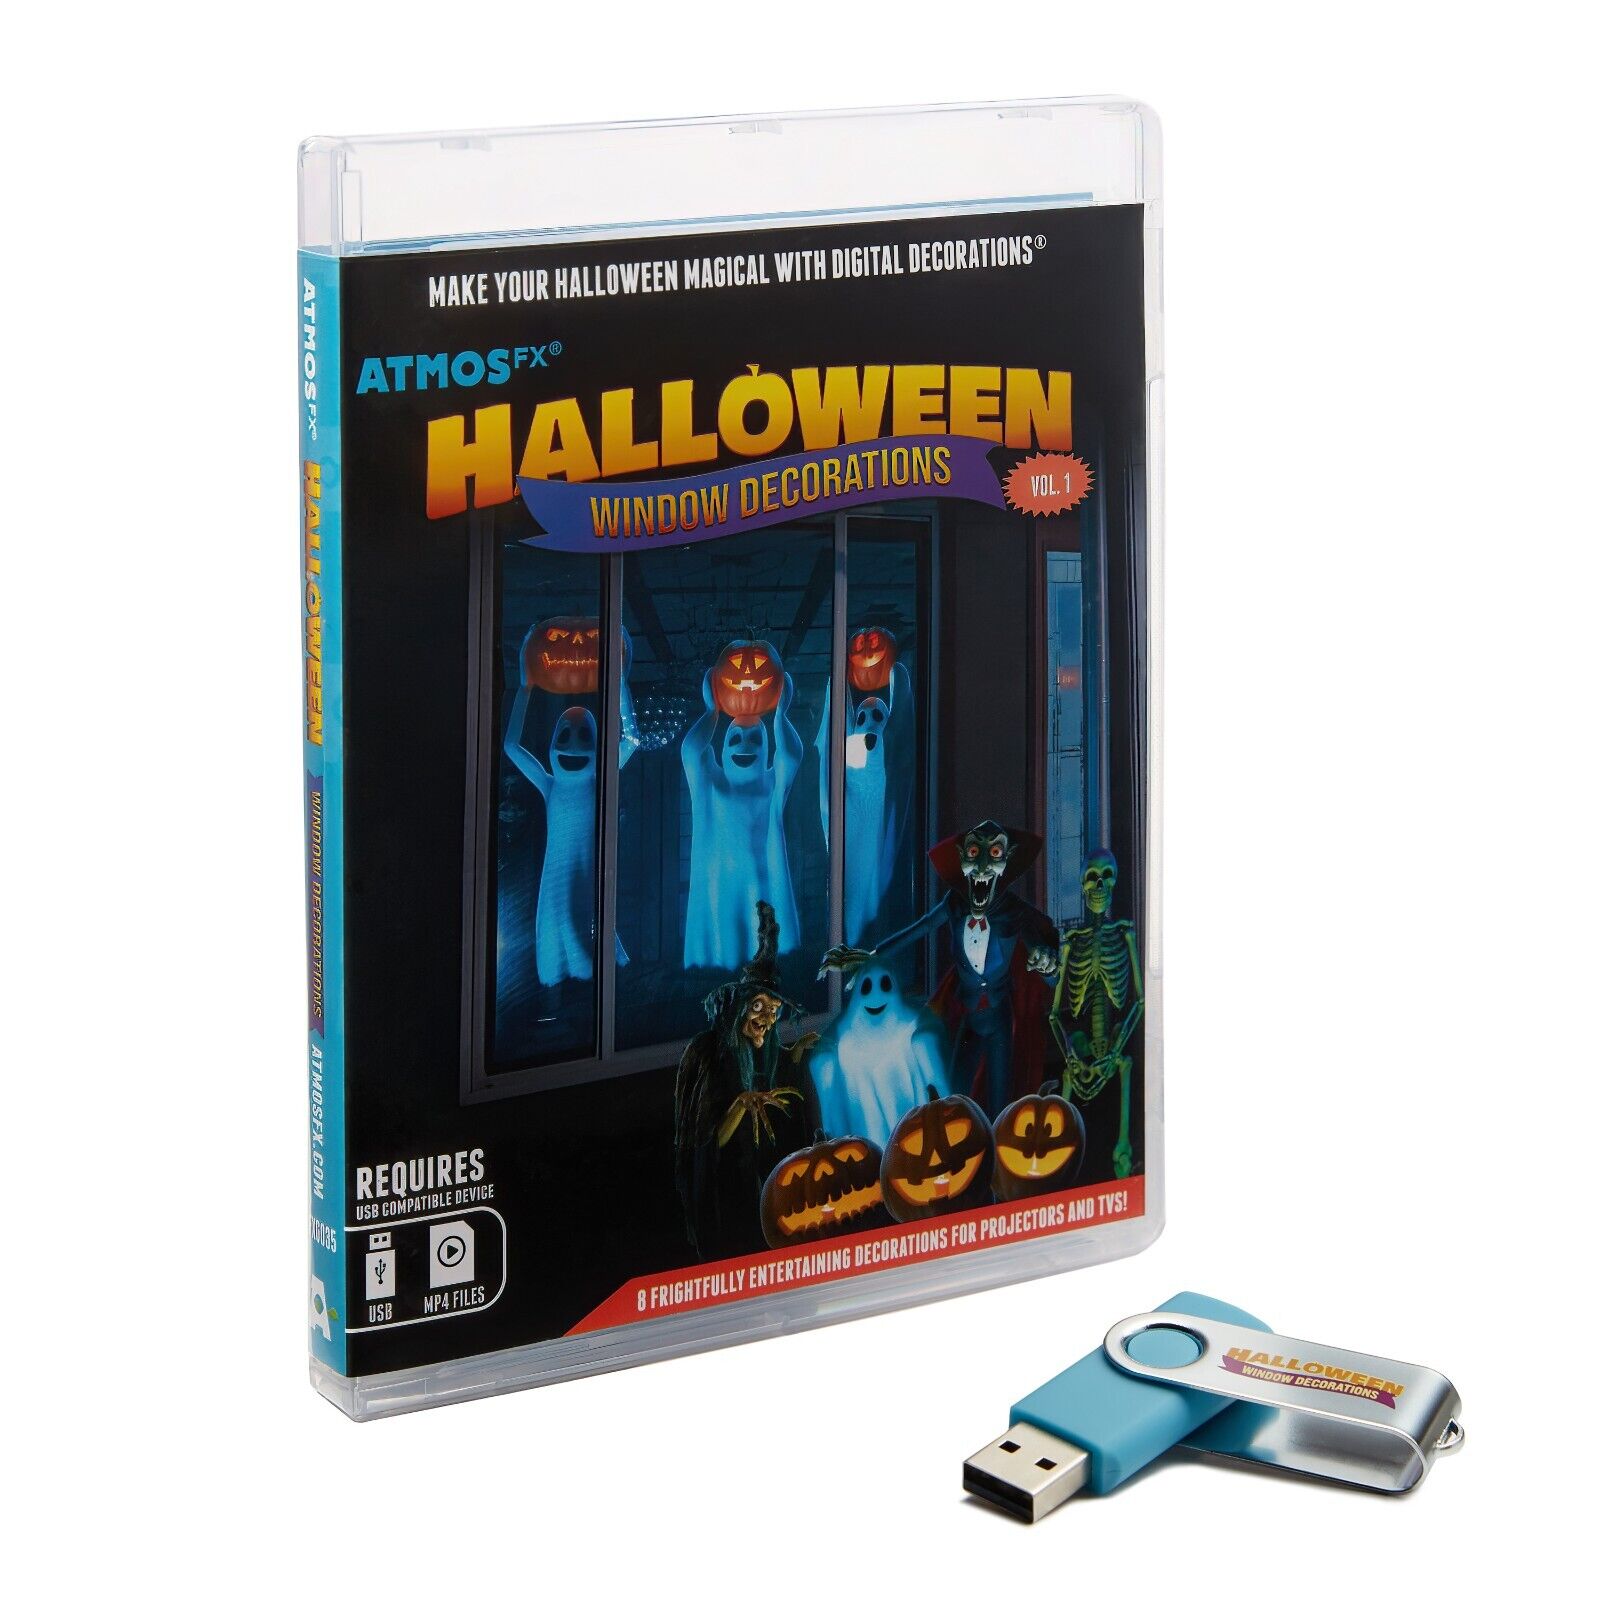 AtmosFX Halloween Digital Decorations on USB - NEW for 2022